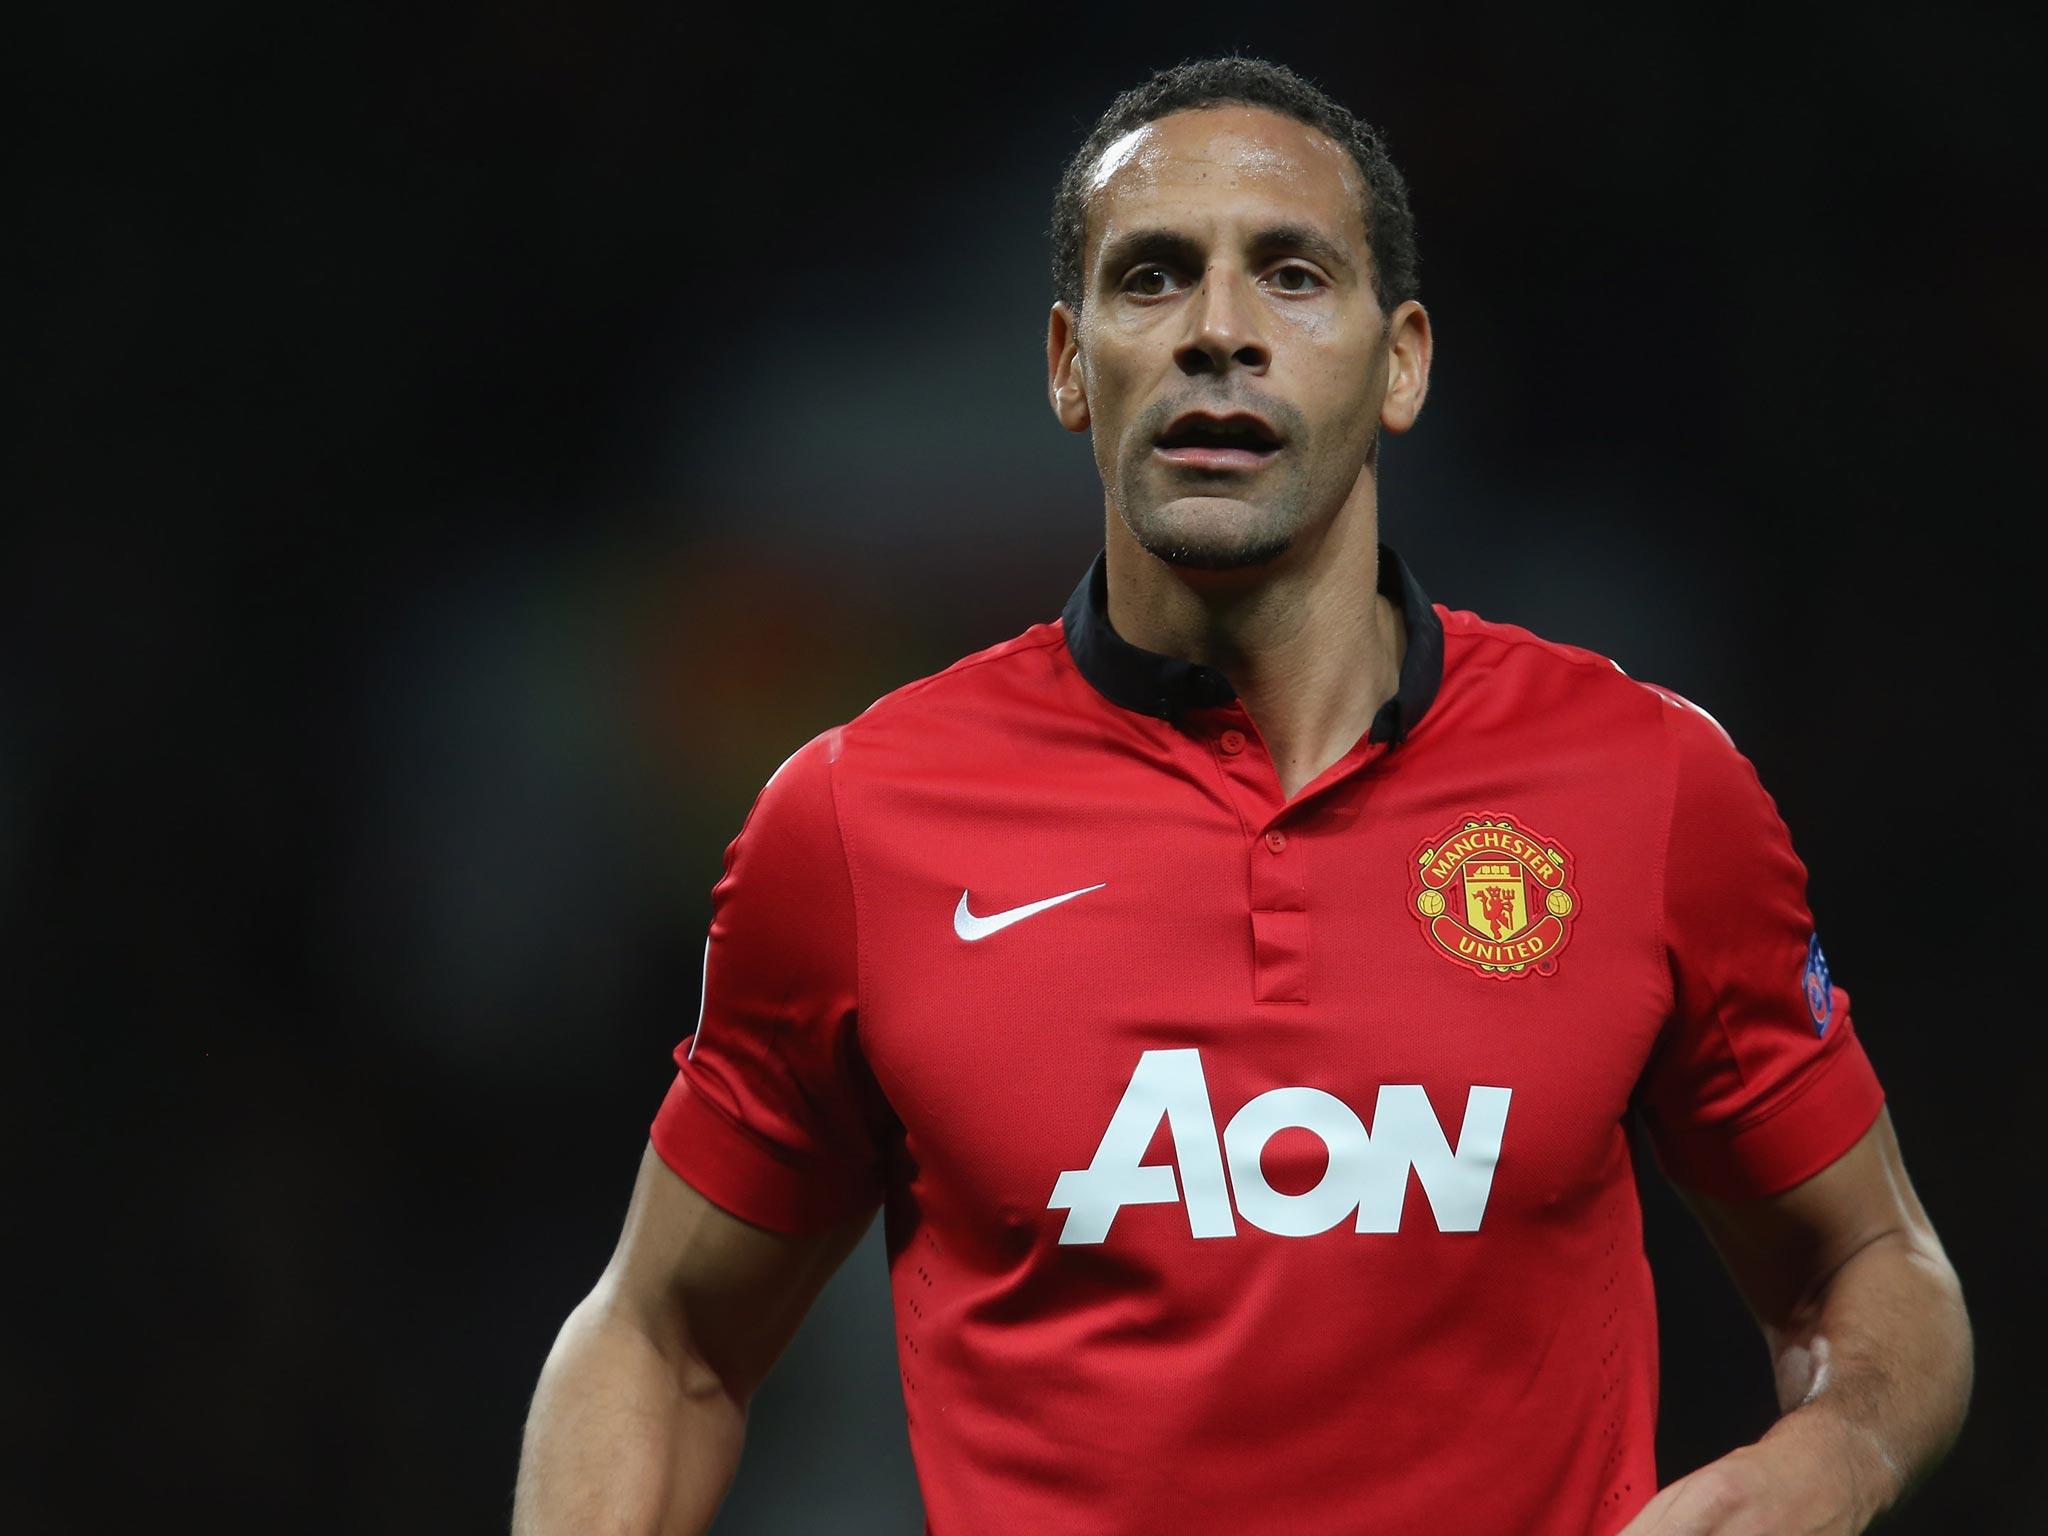 Rio Ferdinand made a HUGE donation to children's charity. News